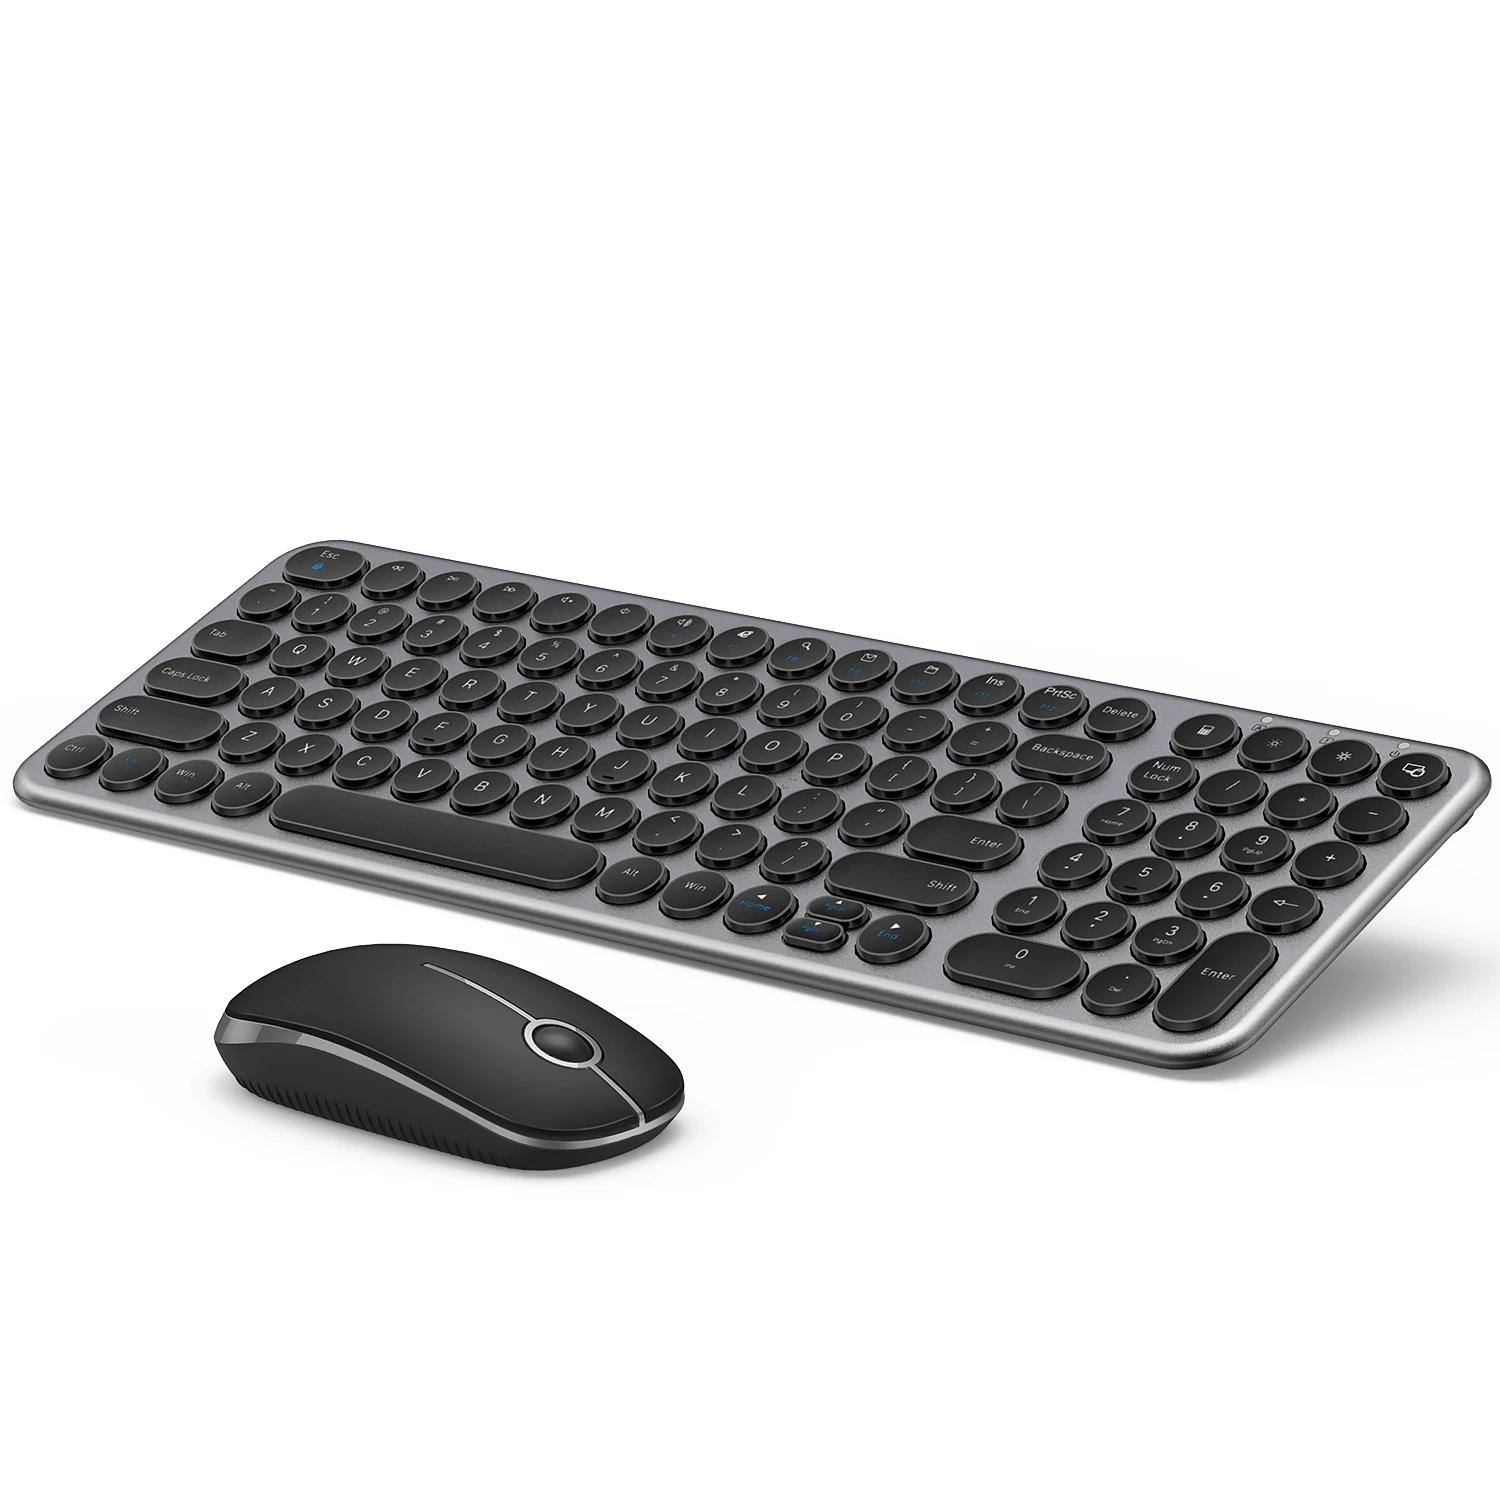 And Mouse Combo Ergonomic Keyboard With Round Keys Usb Mouse For Windows Laptop Pc Notebook